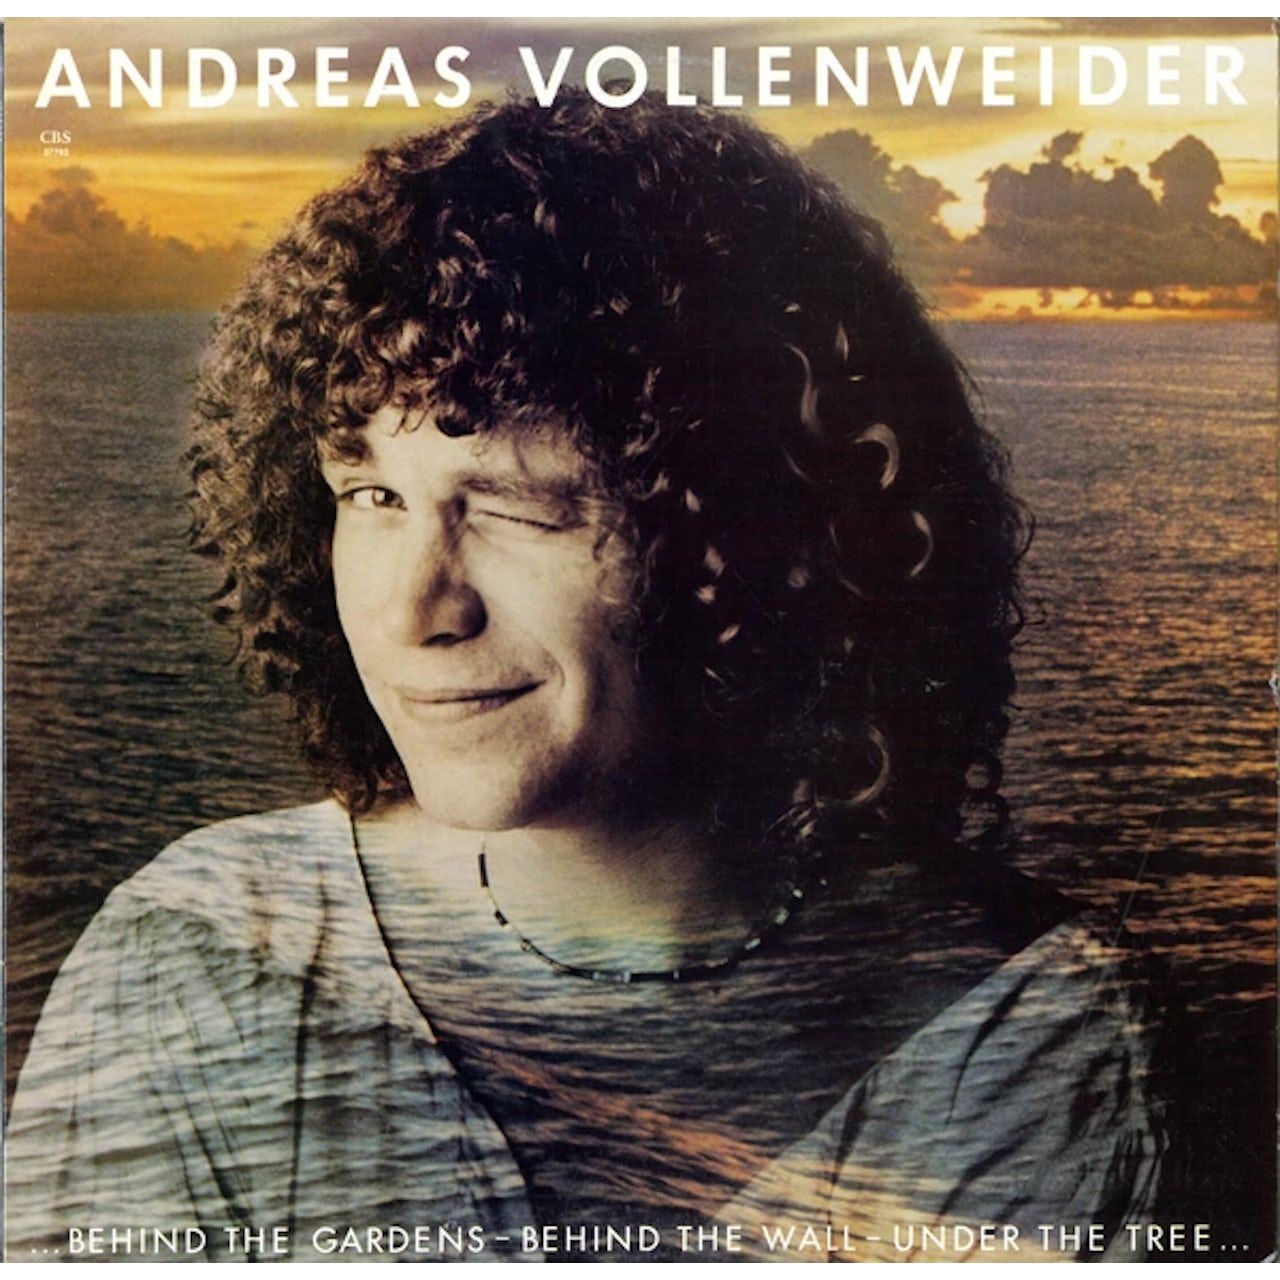 0885513022813, Виниловая пластинка Vollenweider, Andreas, Behind The Gardens - Behind The Wall - Under The Tree